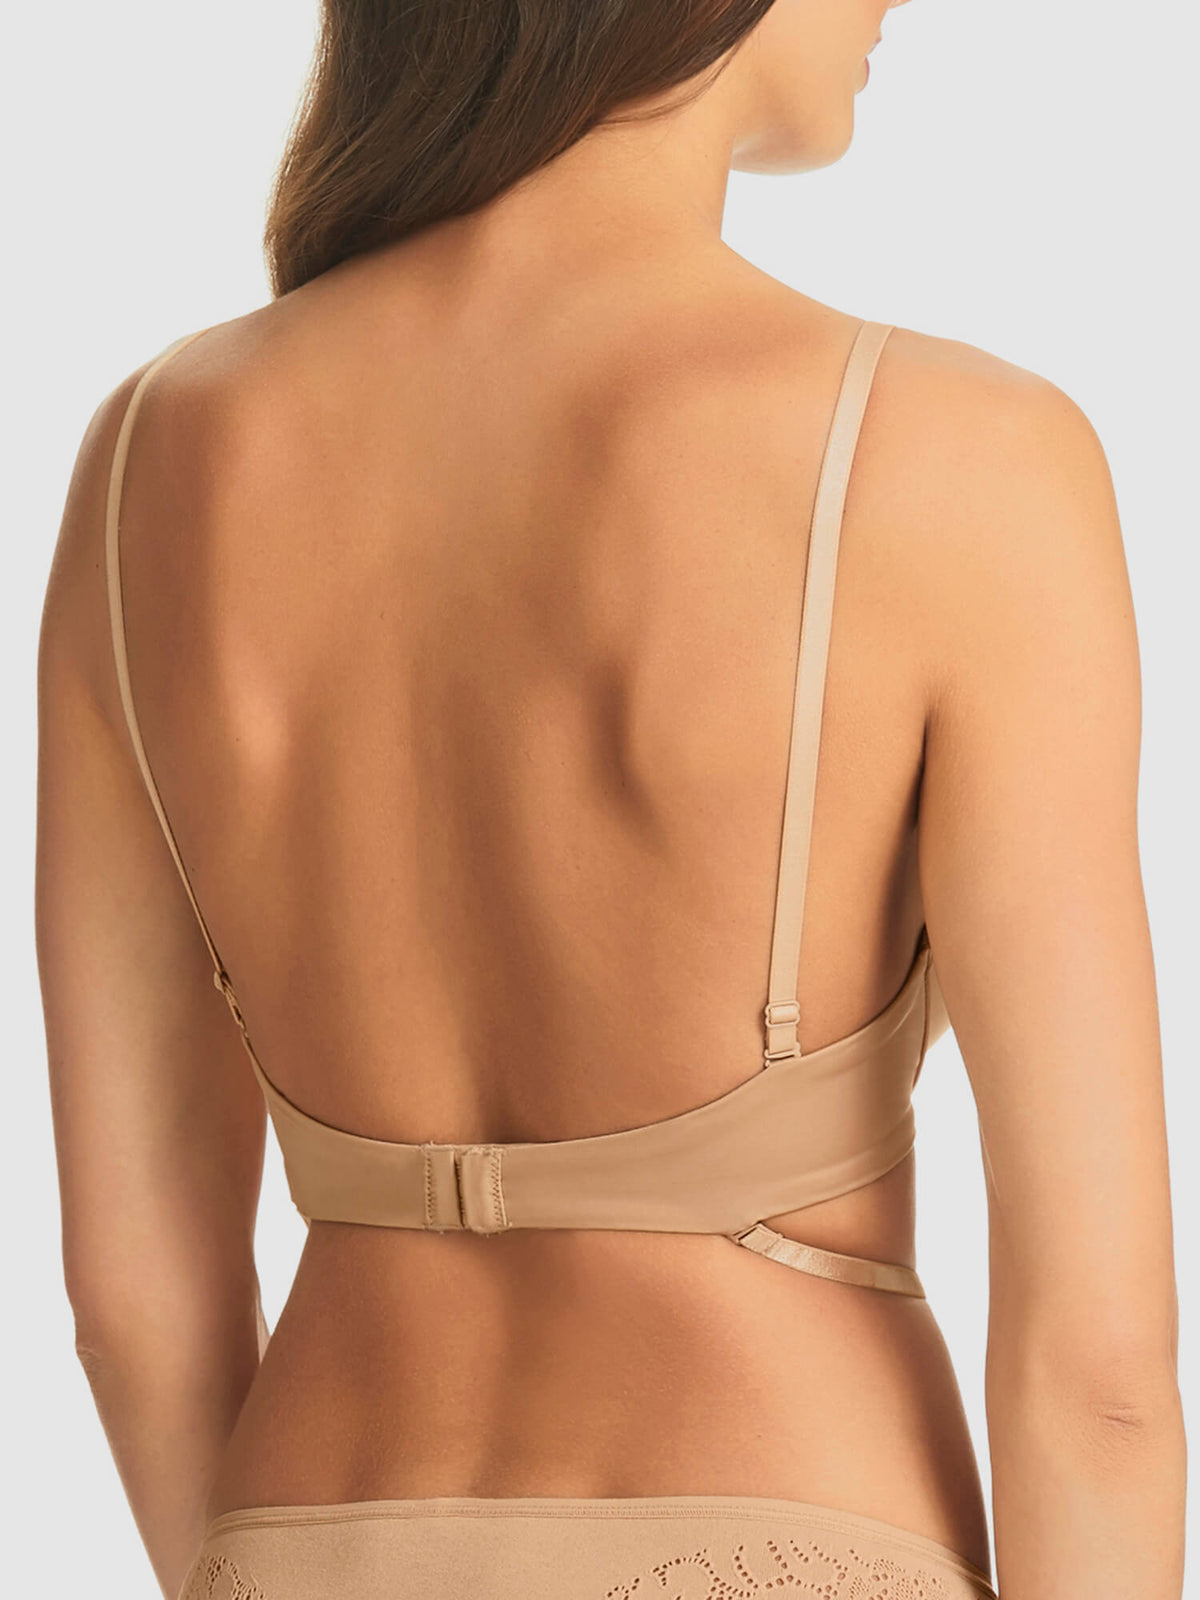 5 Way Convertible Nude Push Up Bra - Fine Lines Lingerie